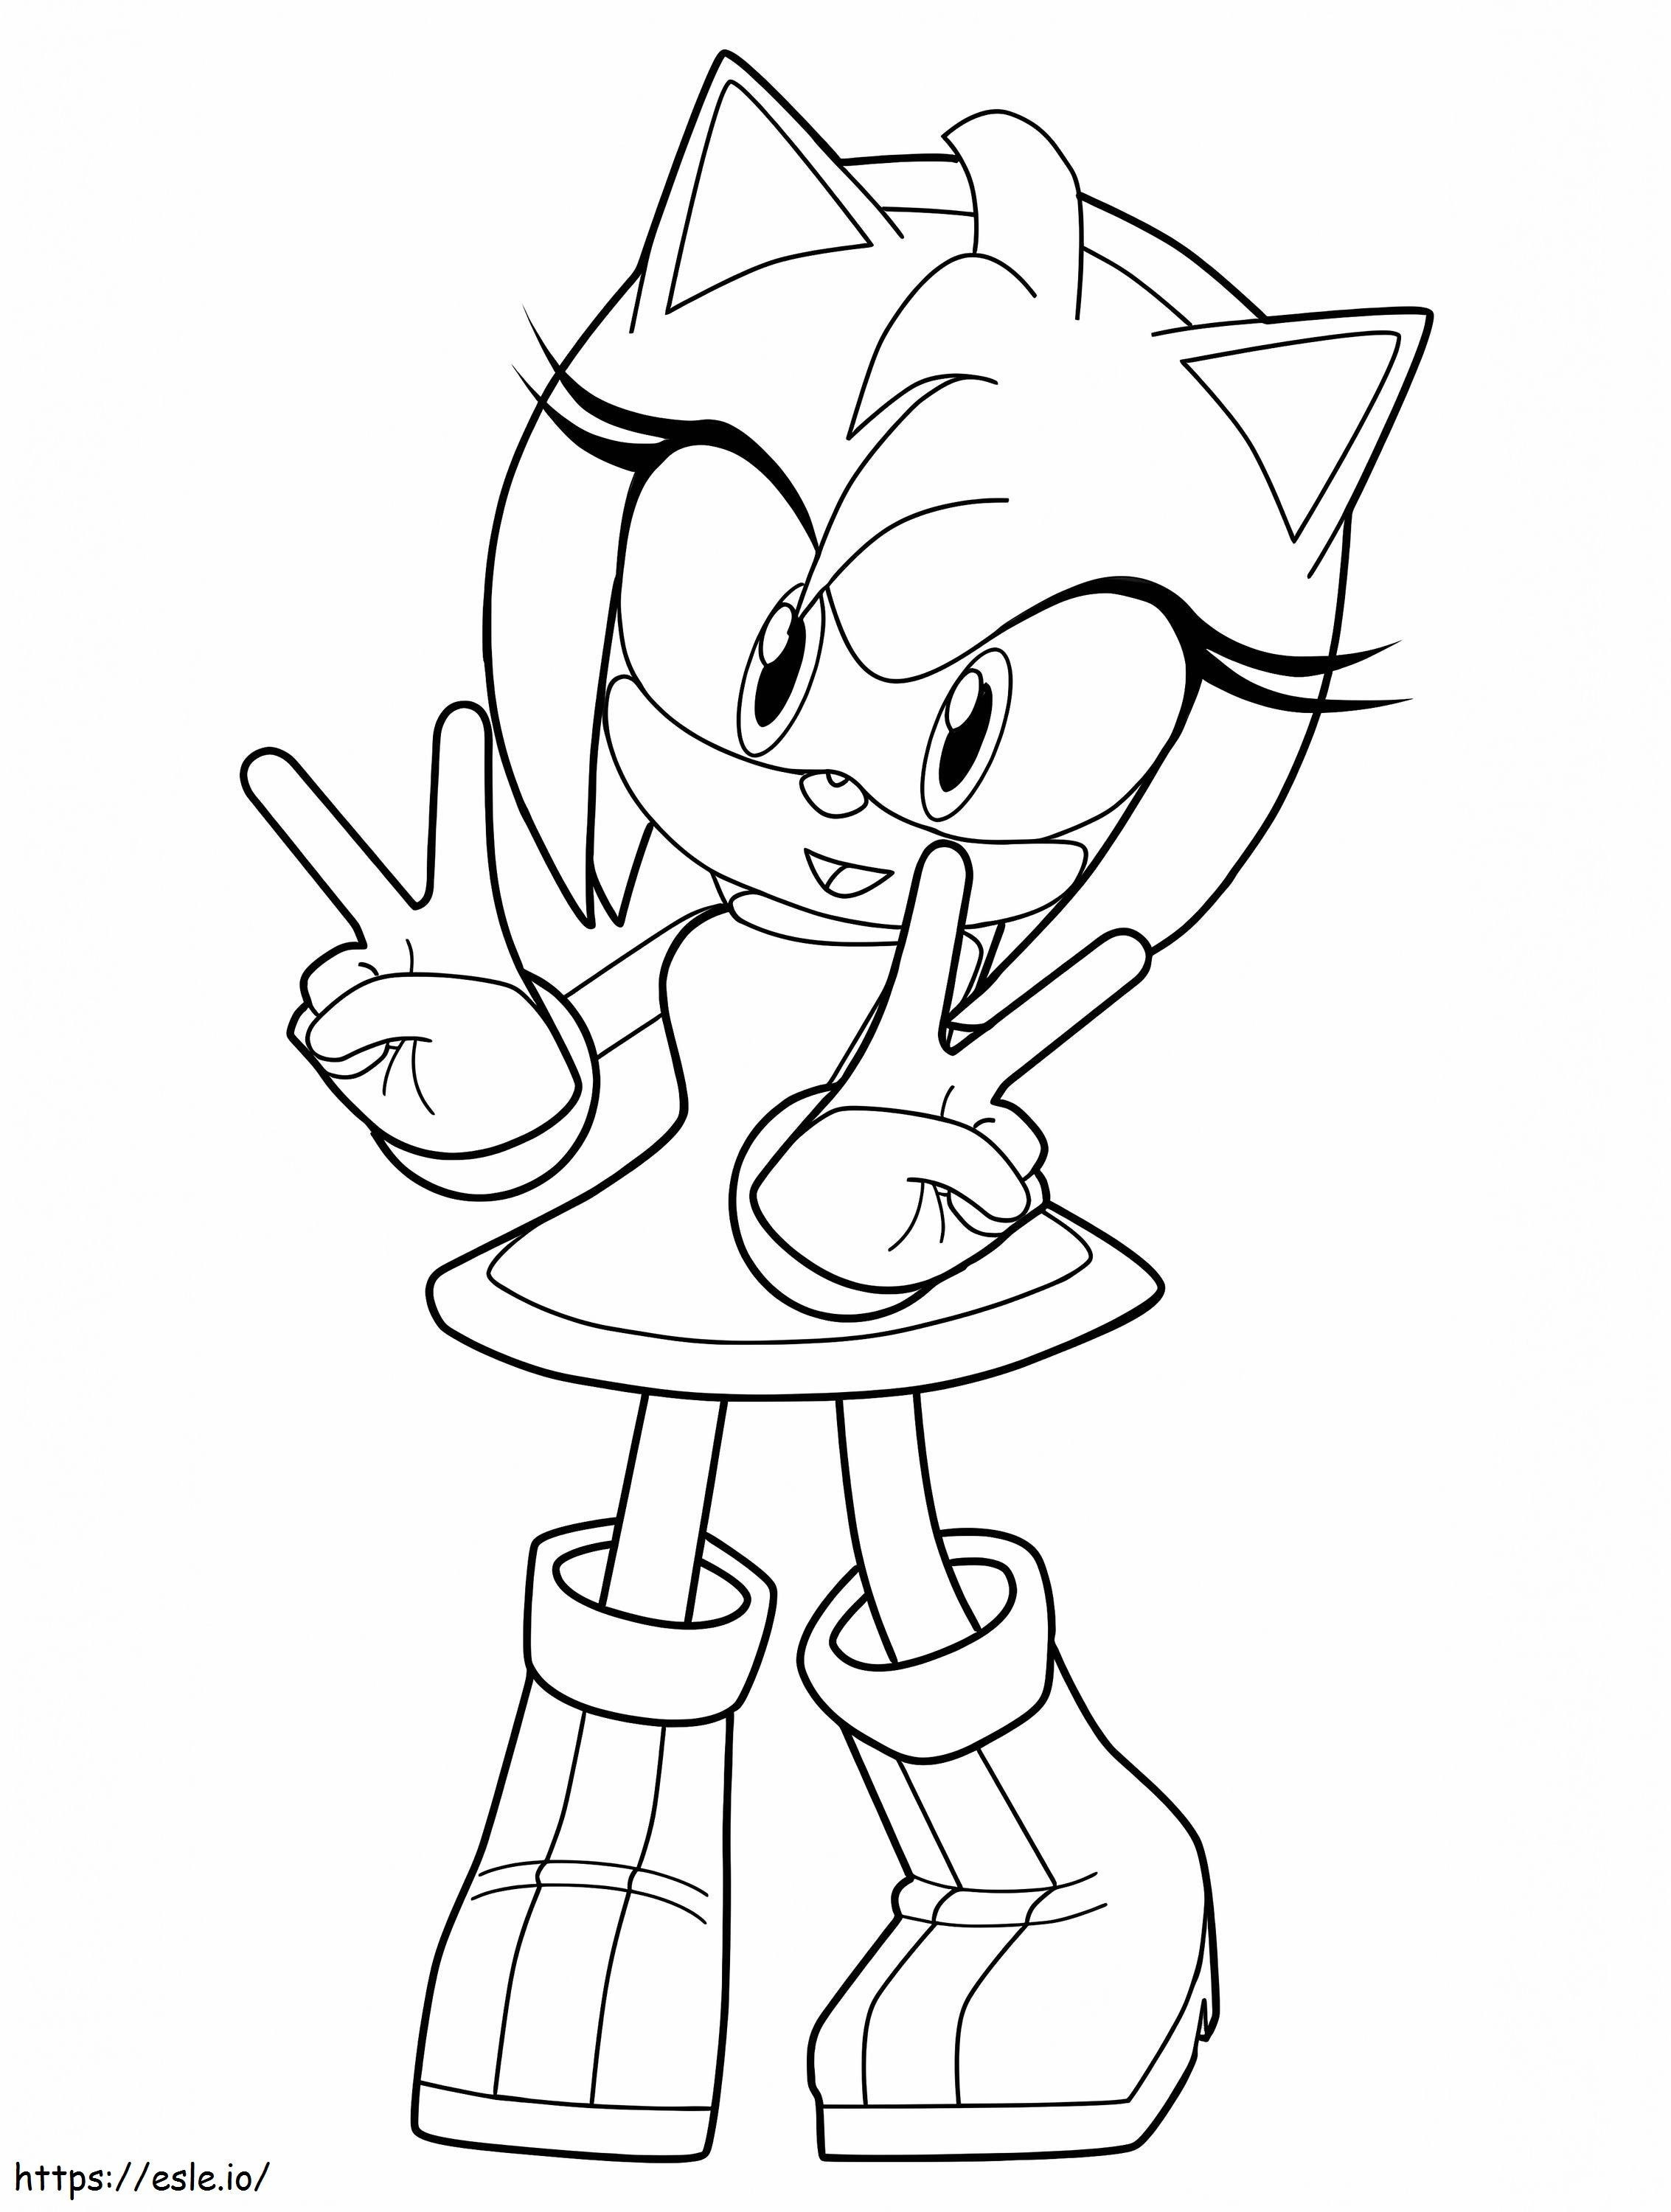 Adorable Amy Rose coloring page